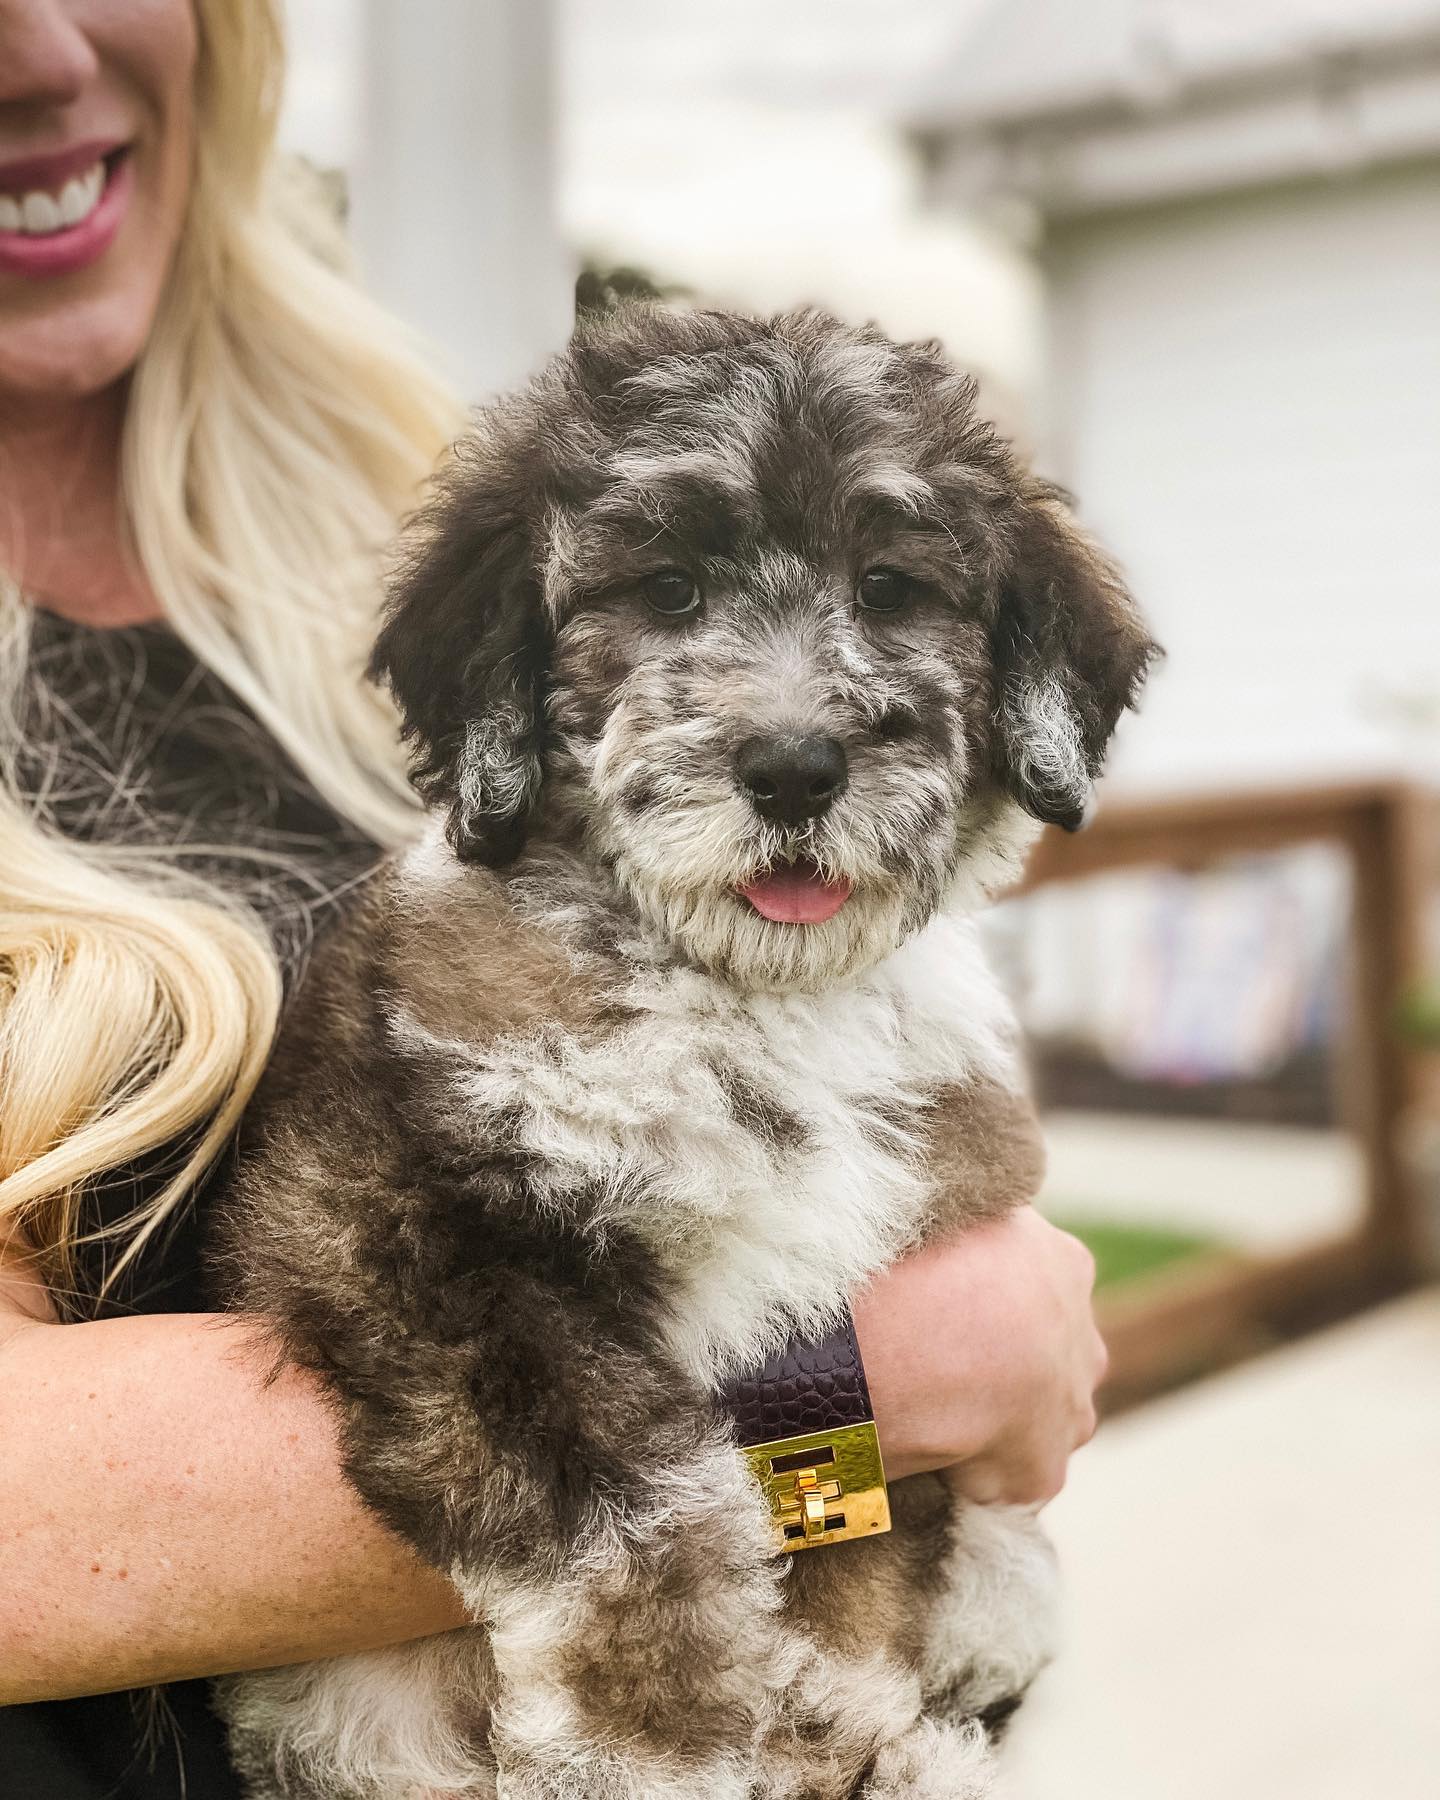 The incredibly rare spotted, wookie-parti golden doodle bred by Smeraglia teddy bear golden doodles is an amazing sight to behold! Its beautiful coat of fur is a mix of different shades of color, and it has adorable floppy ears that make it look like a teddy bear.